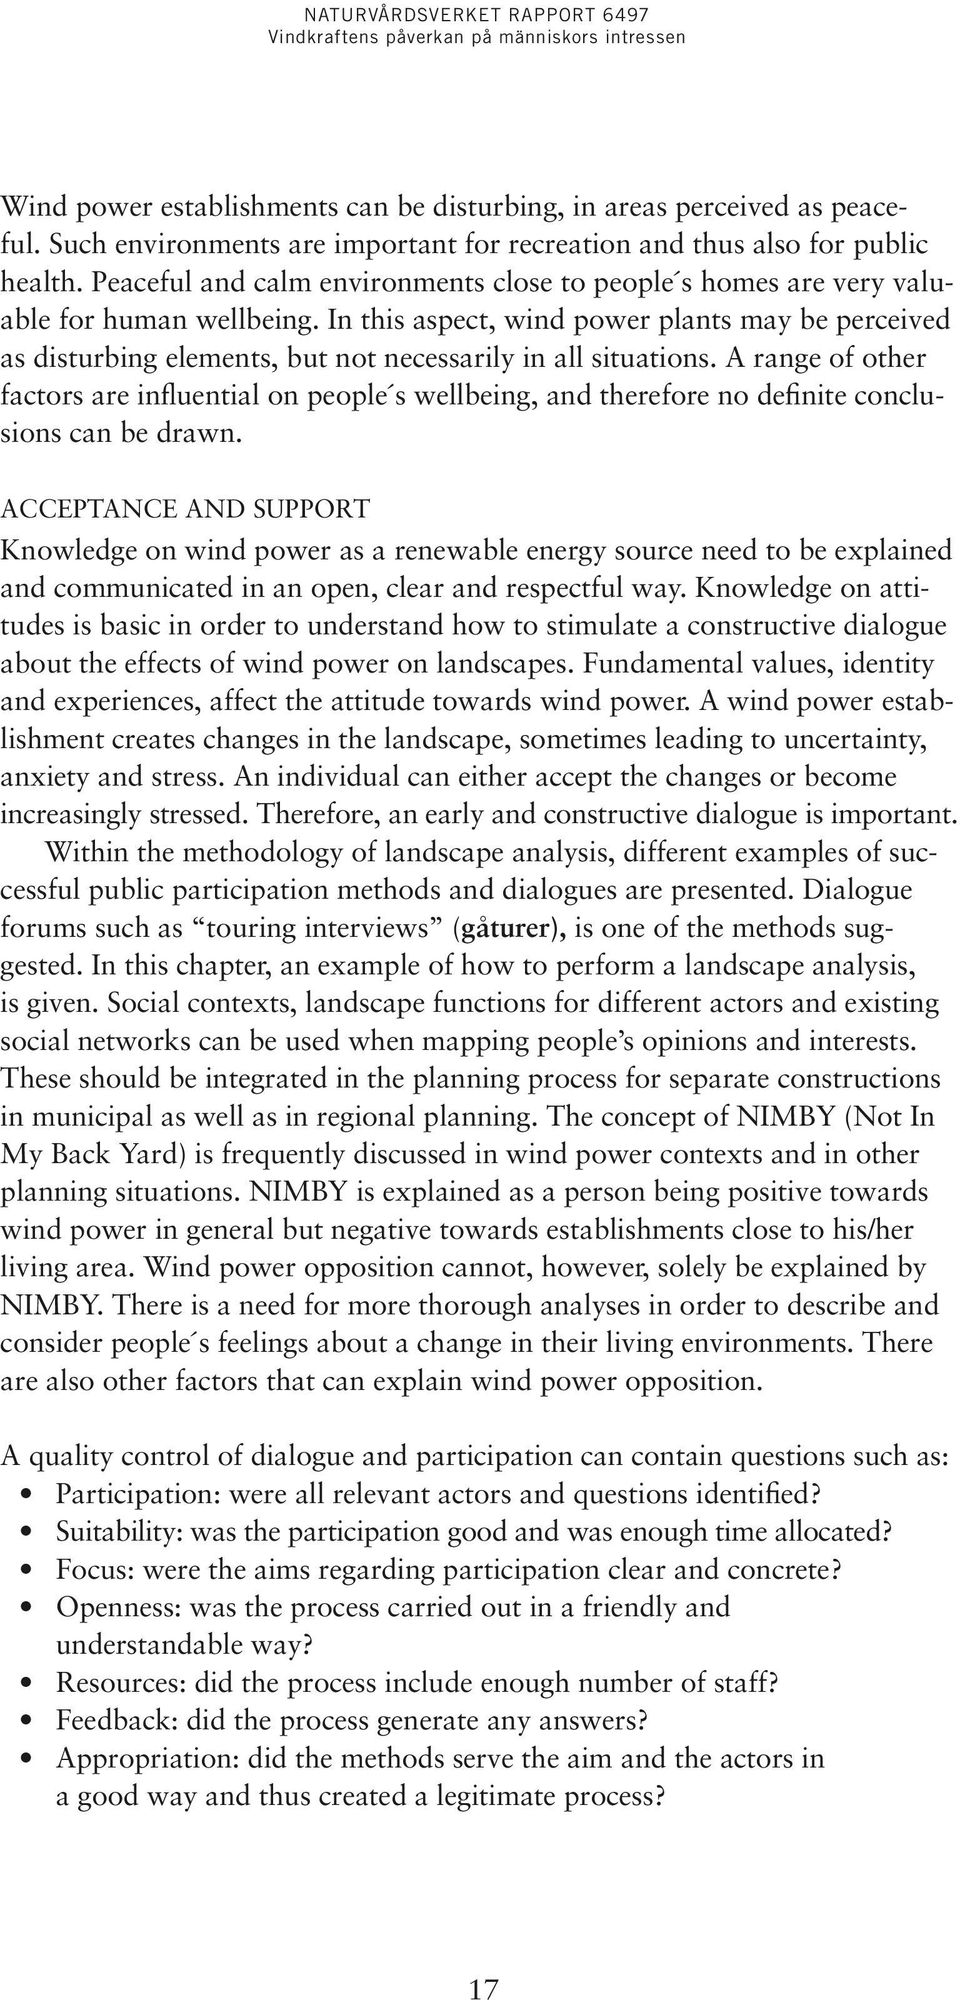 In this aspect, wind power plants may be perceived as disturbing elements, but not necessarily in all situations.